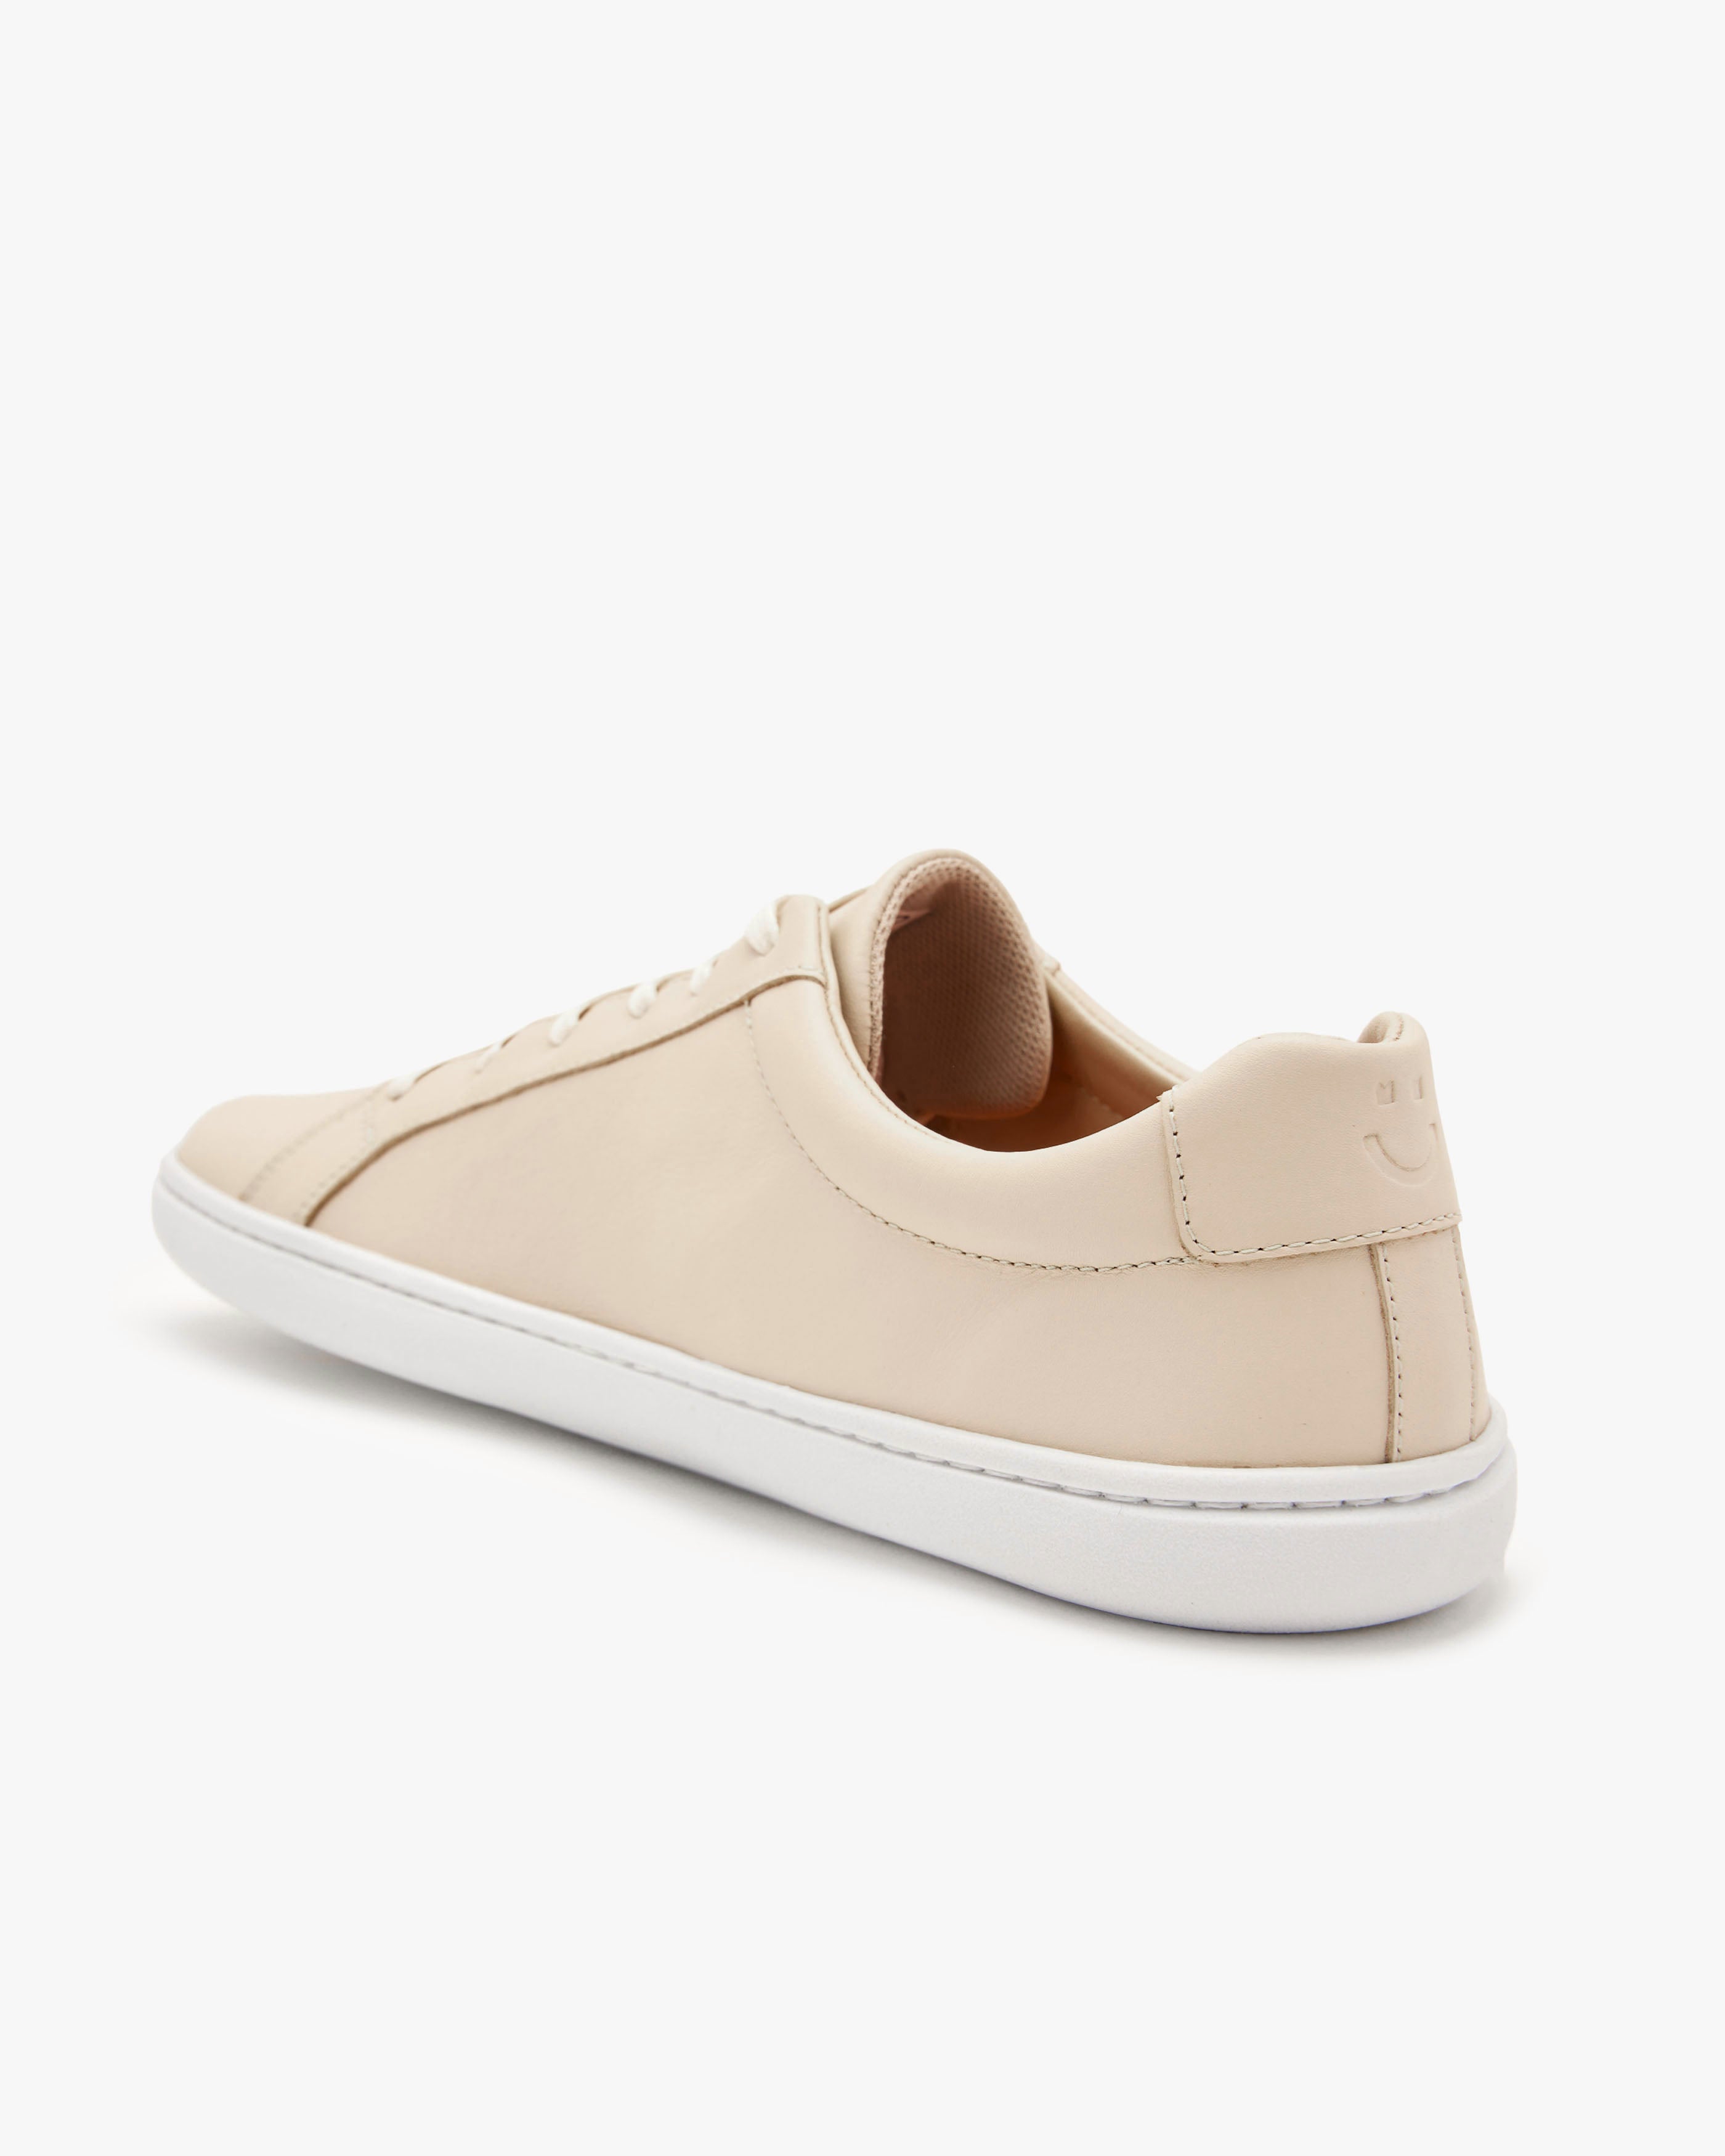 The Everyday Sneaker for Men - Final Sale | Gen 3 in Natural Leather-1